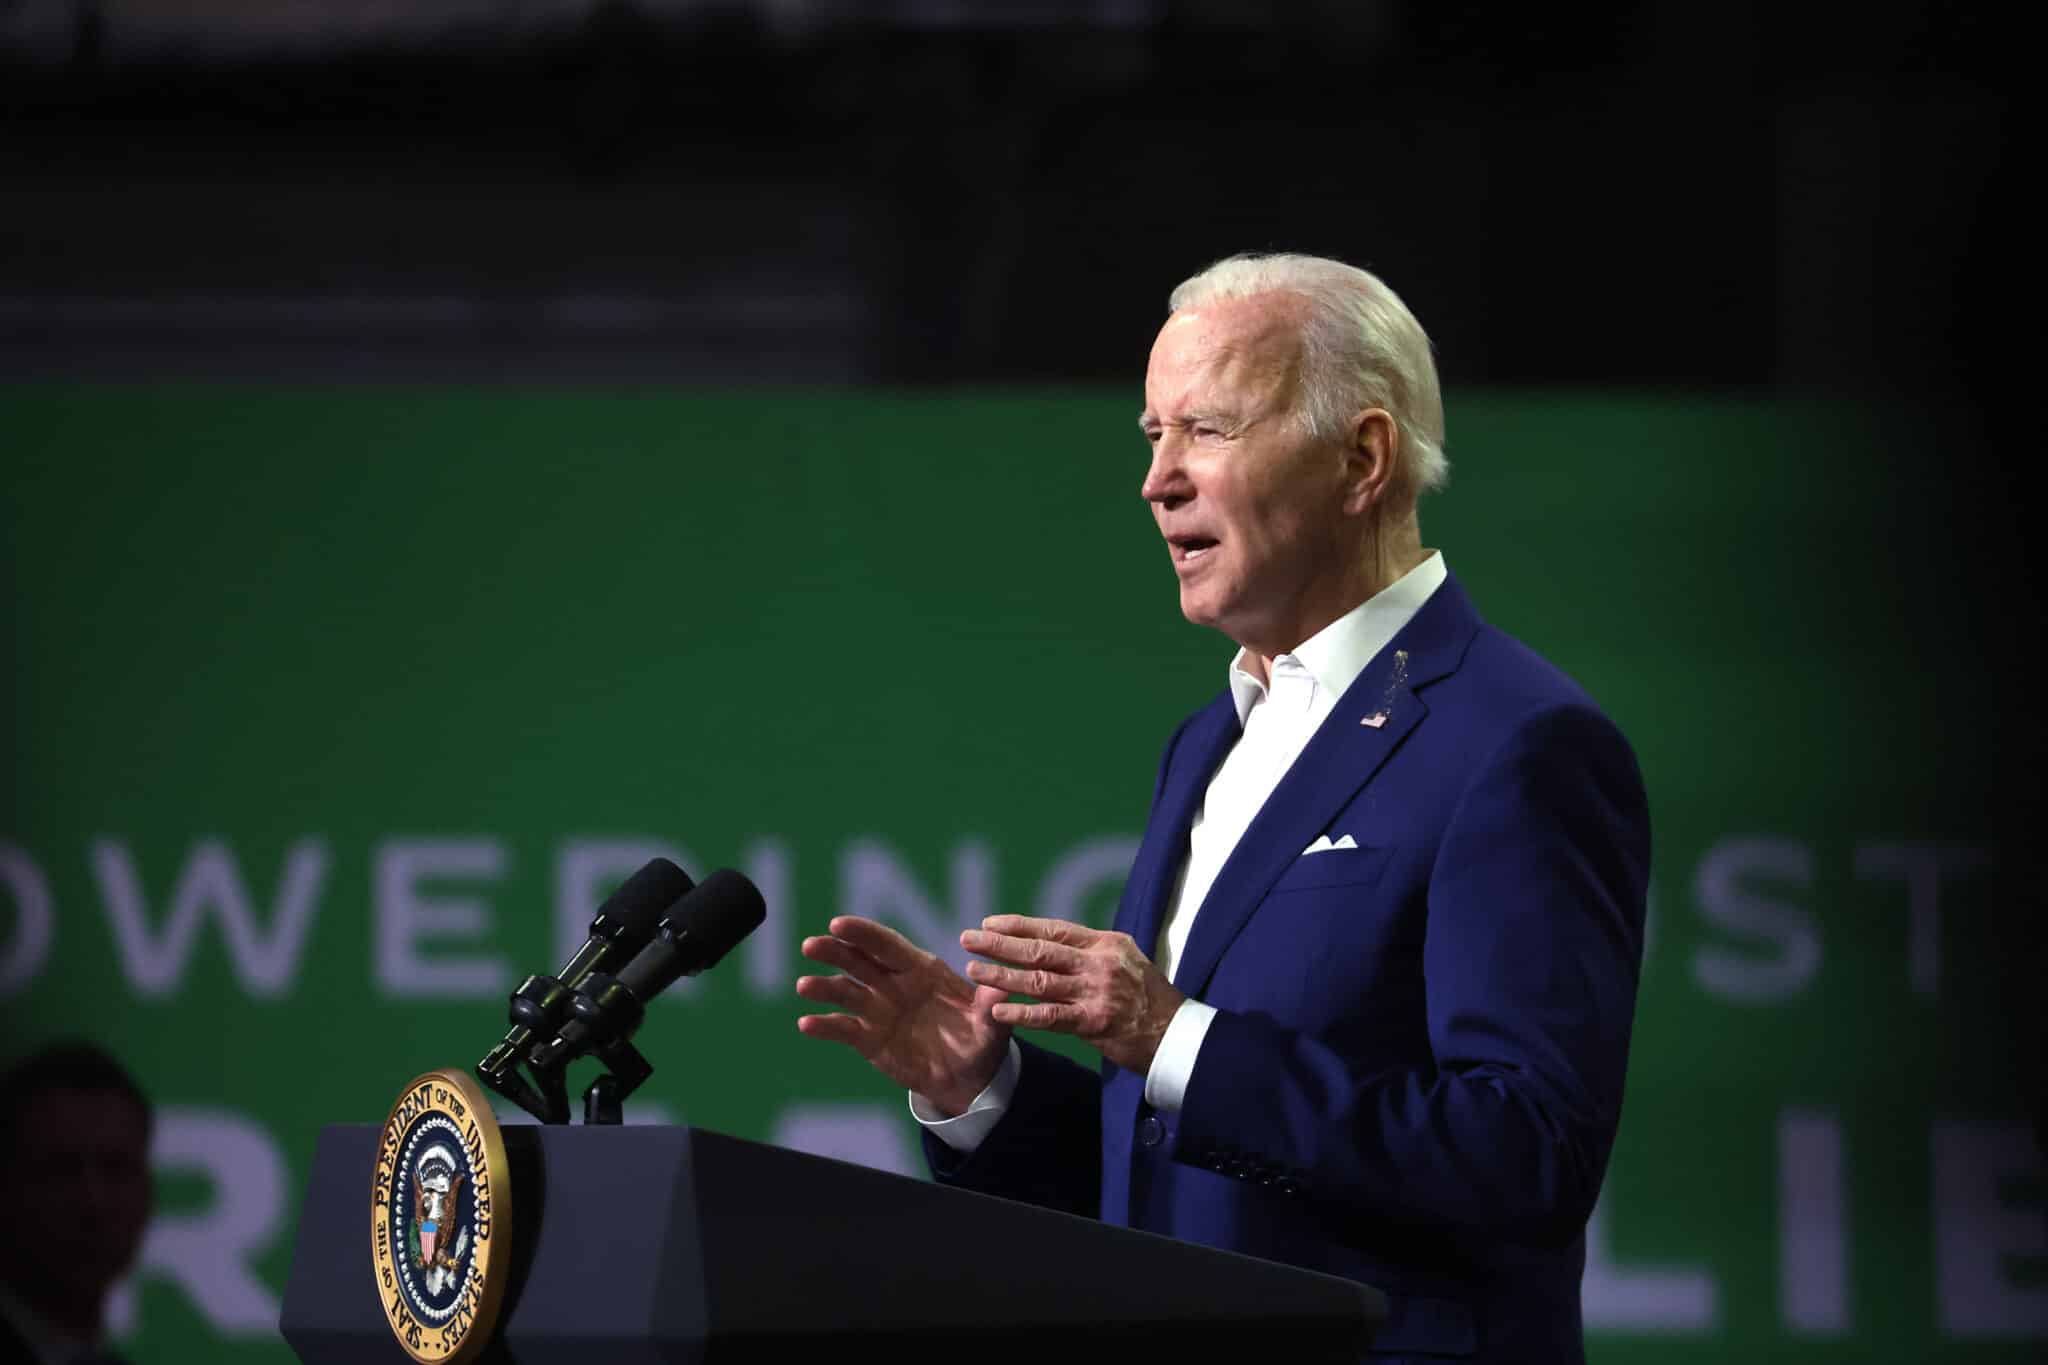 President Biden Delivers Remarks On Lowering Costs For Families In Iowa